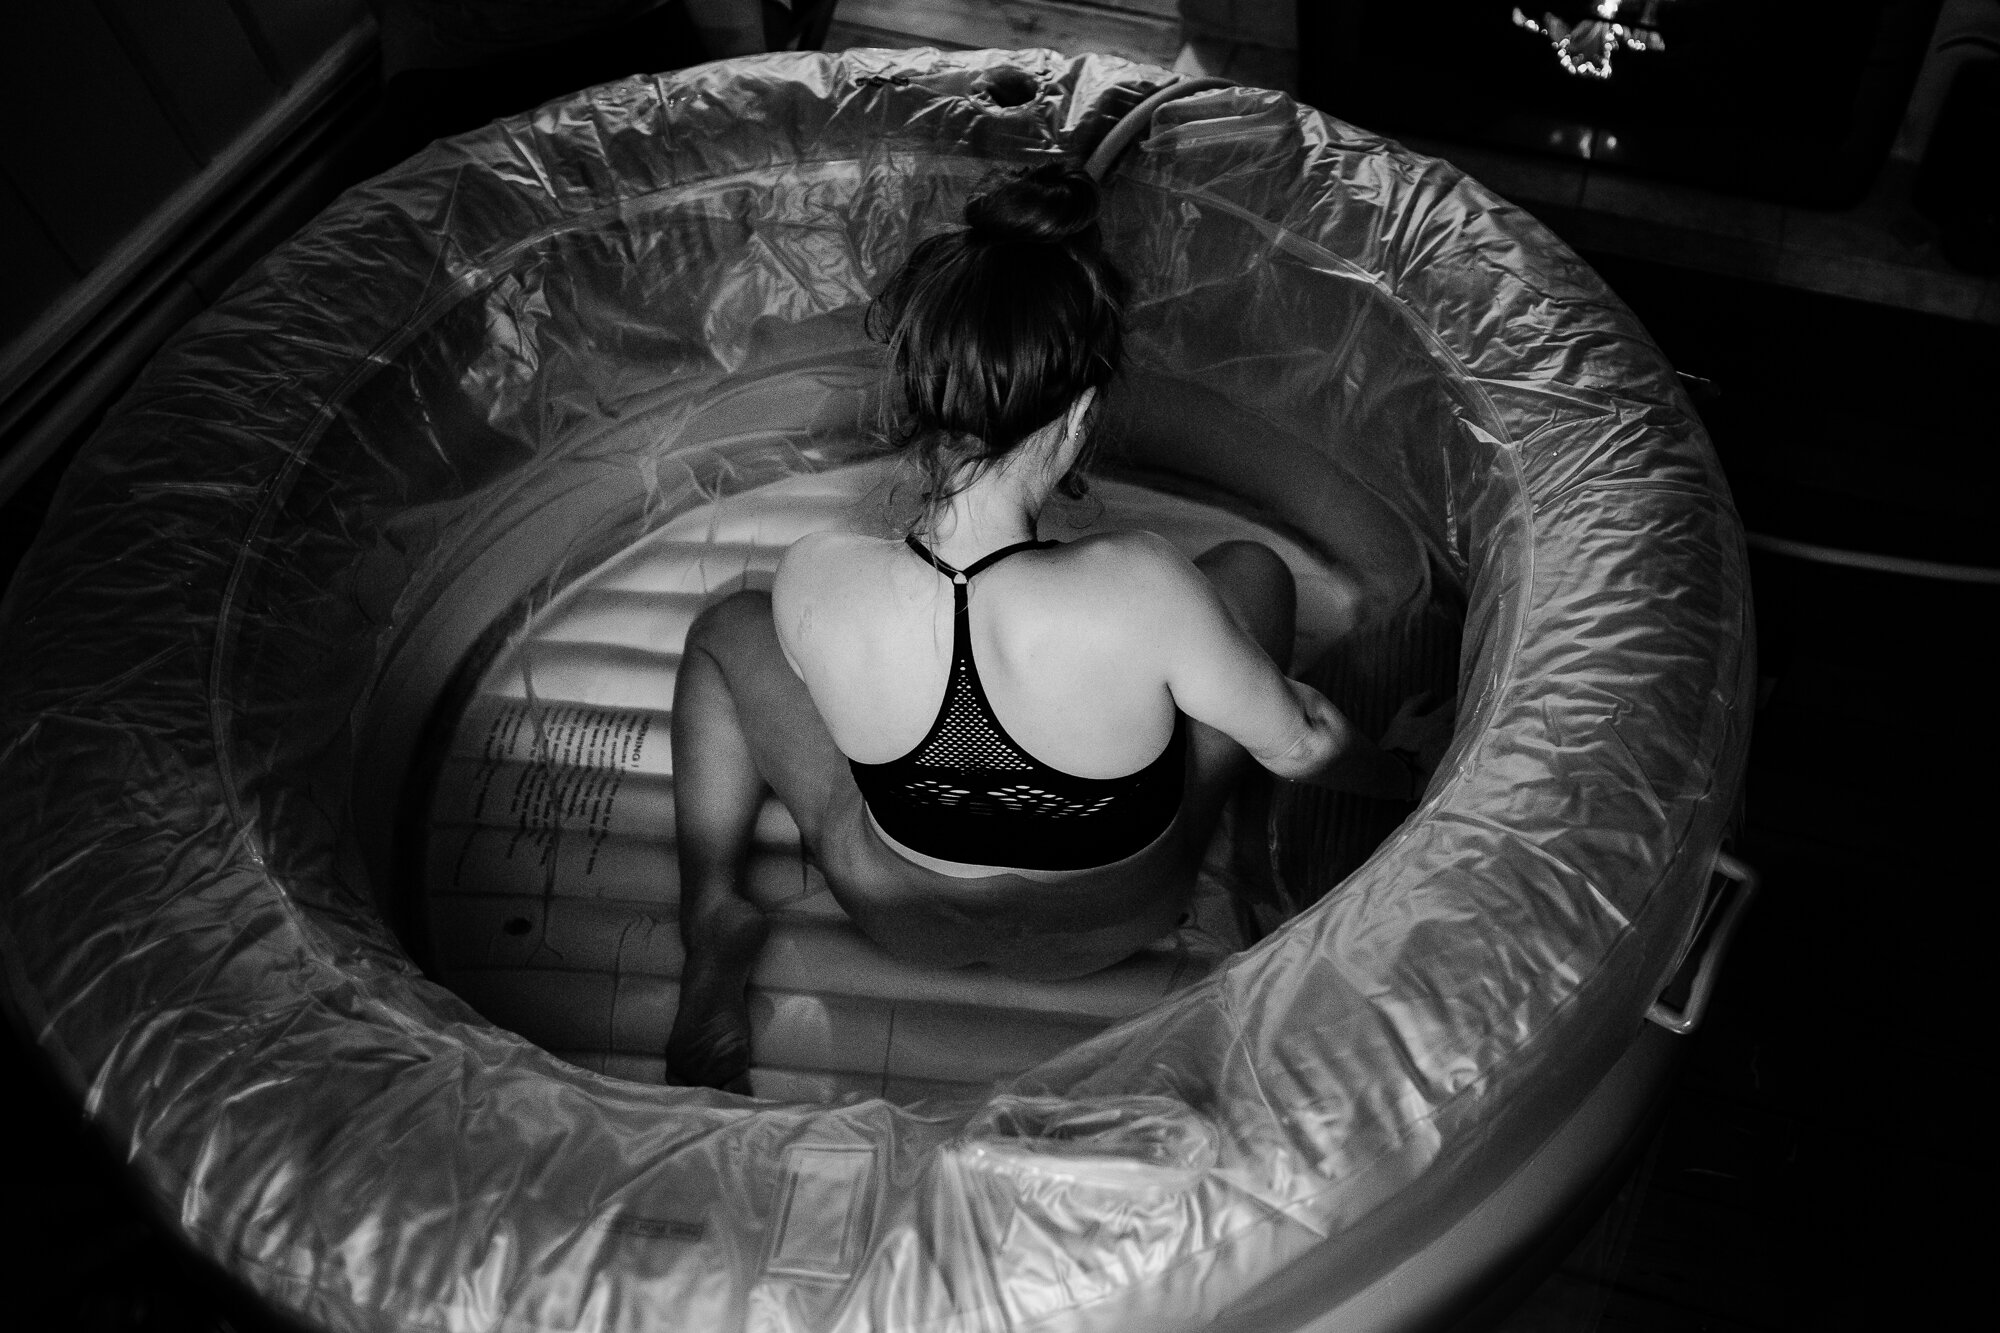 Black and white portrait from overhead of a women laboring in a birthing tub at home, birth photographer Philadelphia